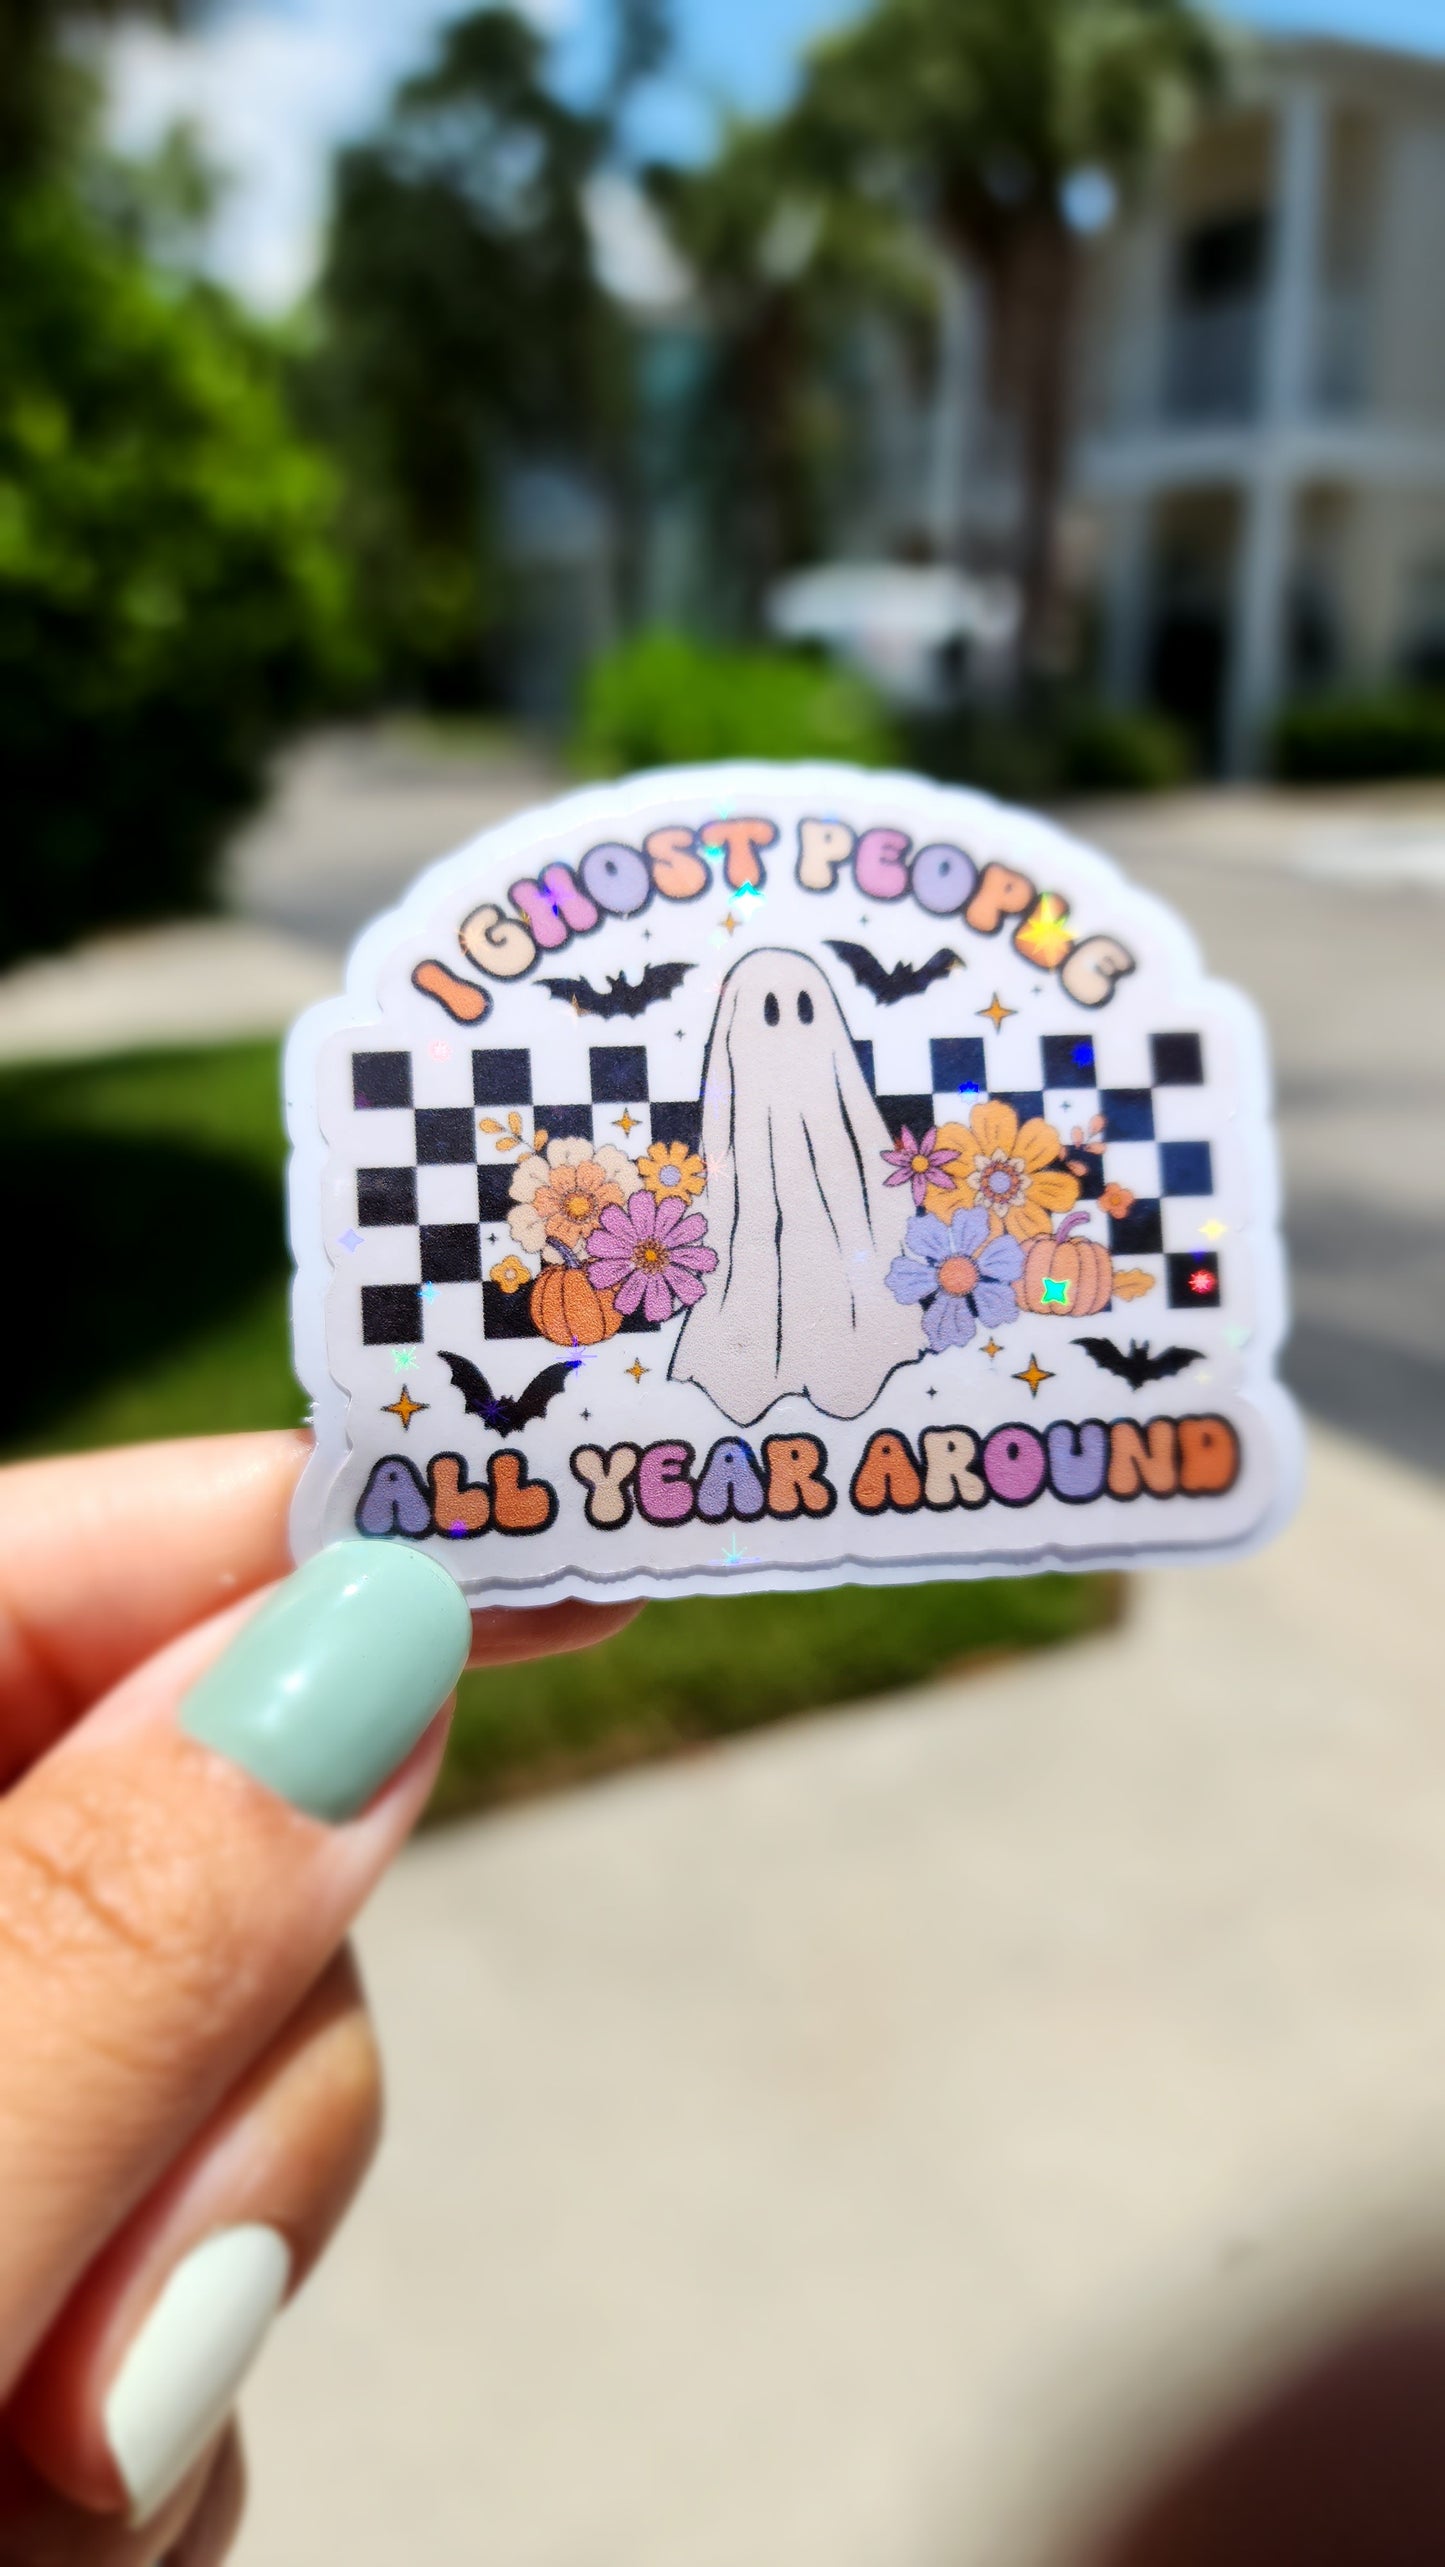 " I ghost people all year round" sticker